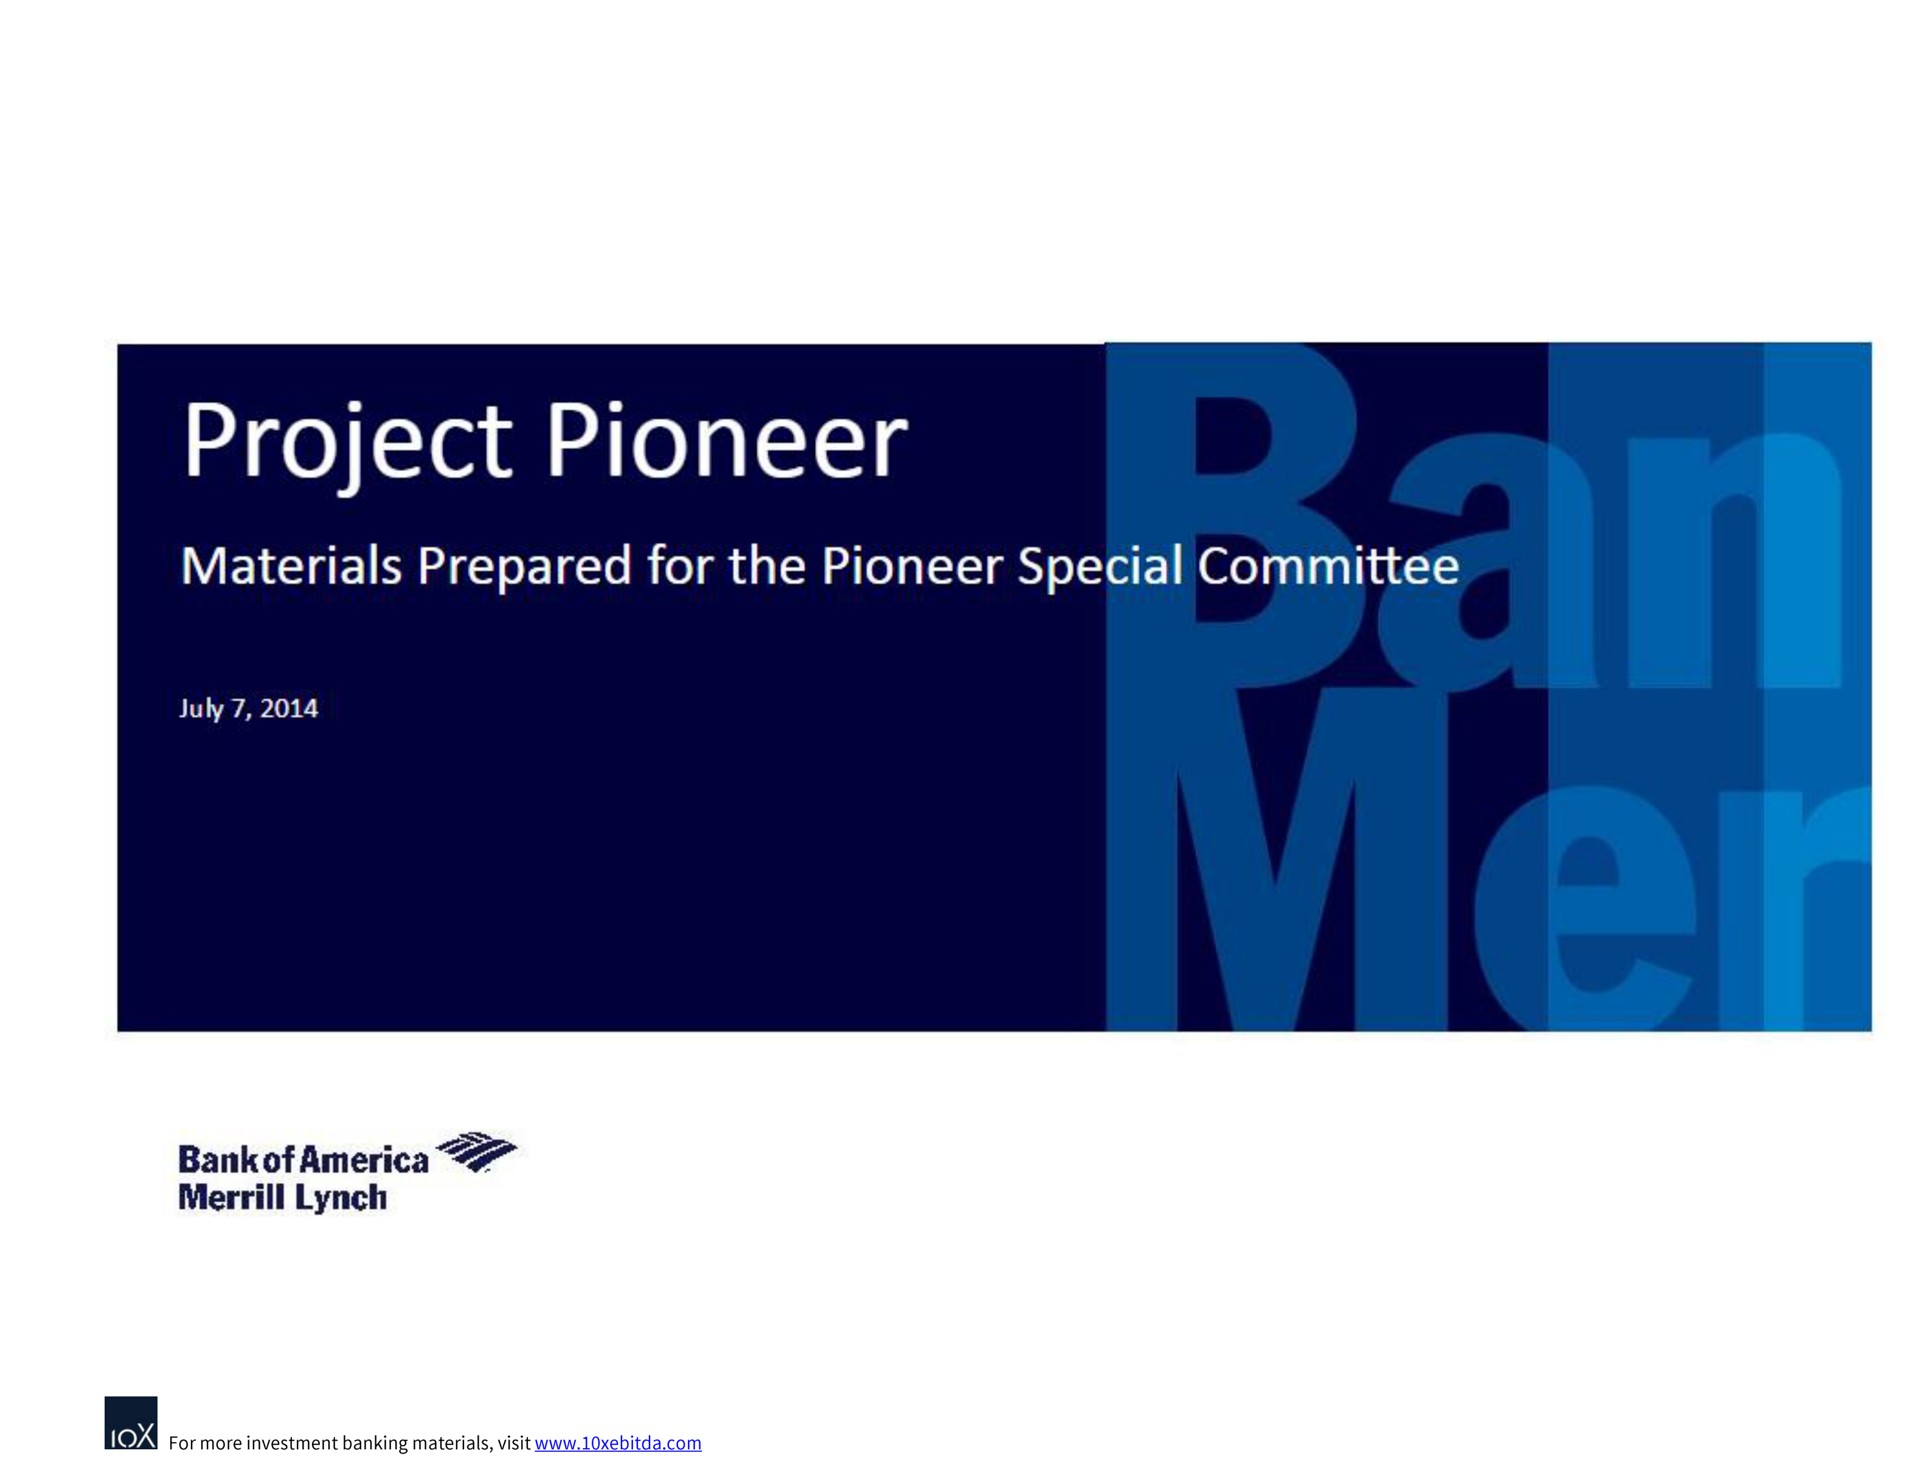 project pioneer materials prepared for the pioneer special committee | Bank of America